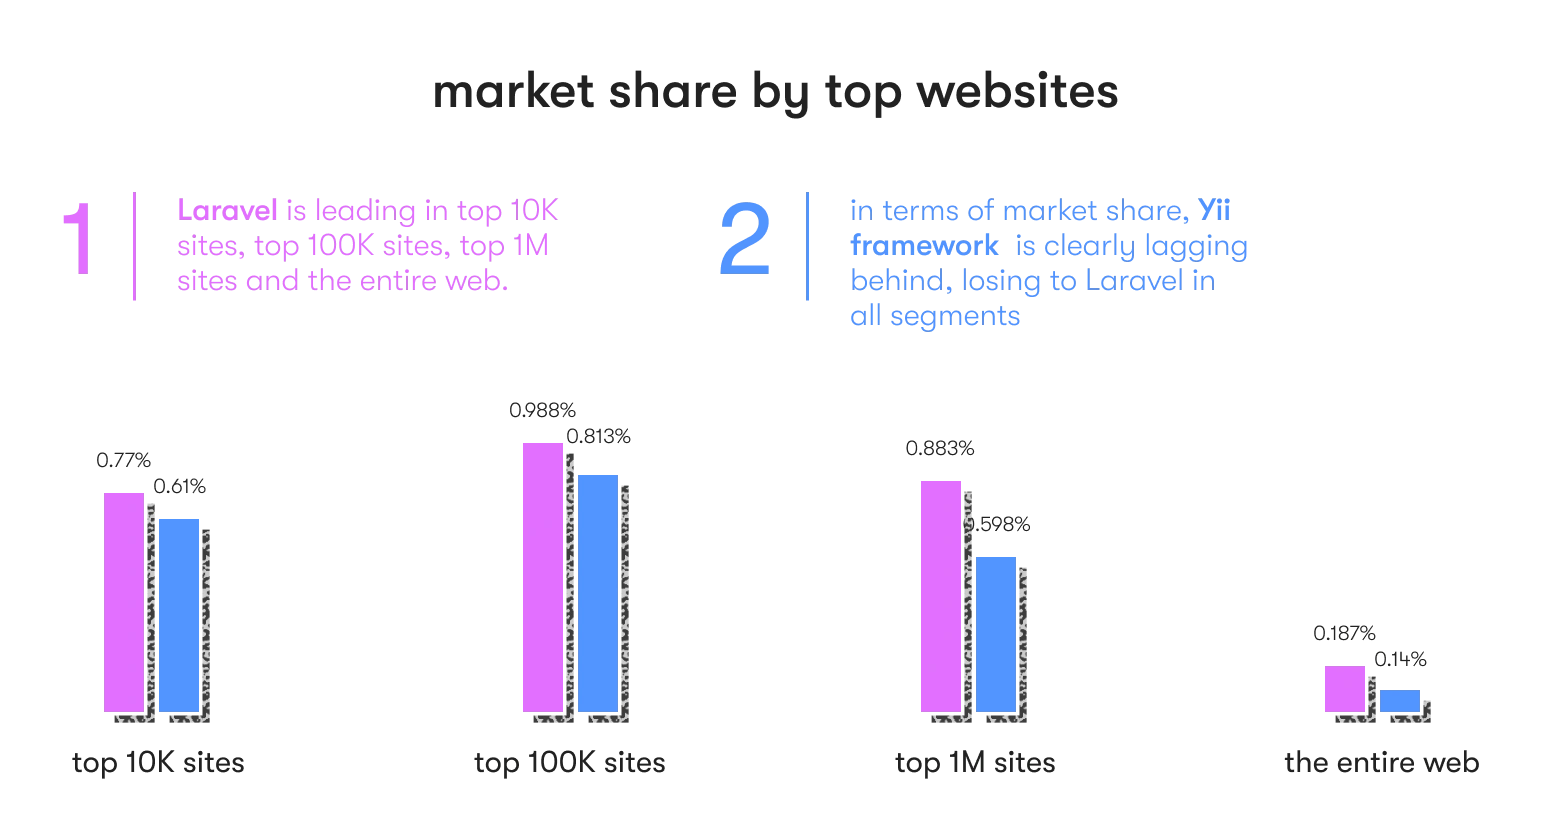 Yii & Laravel market share by top websites